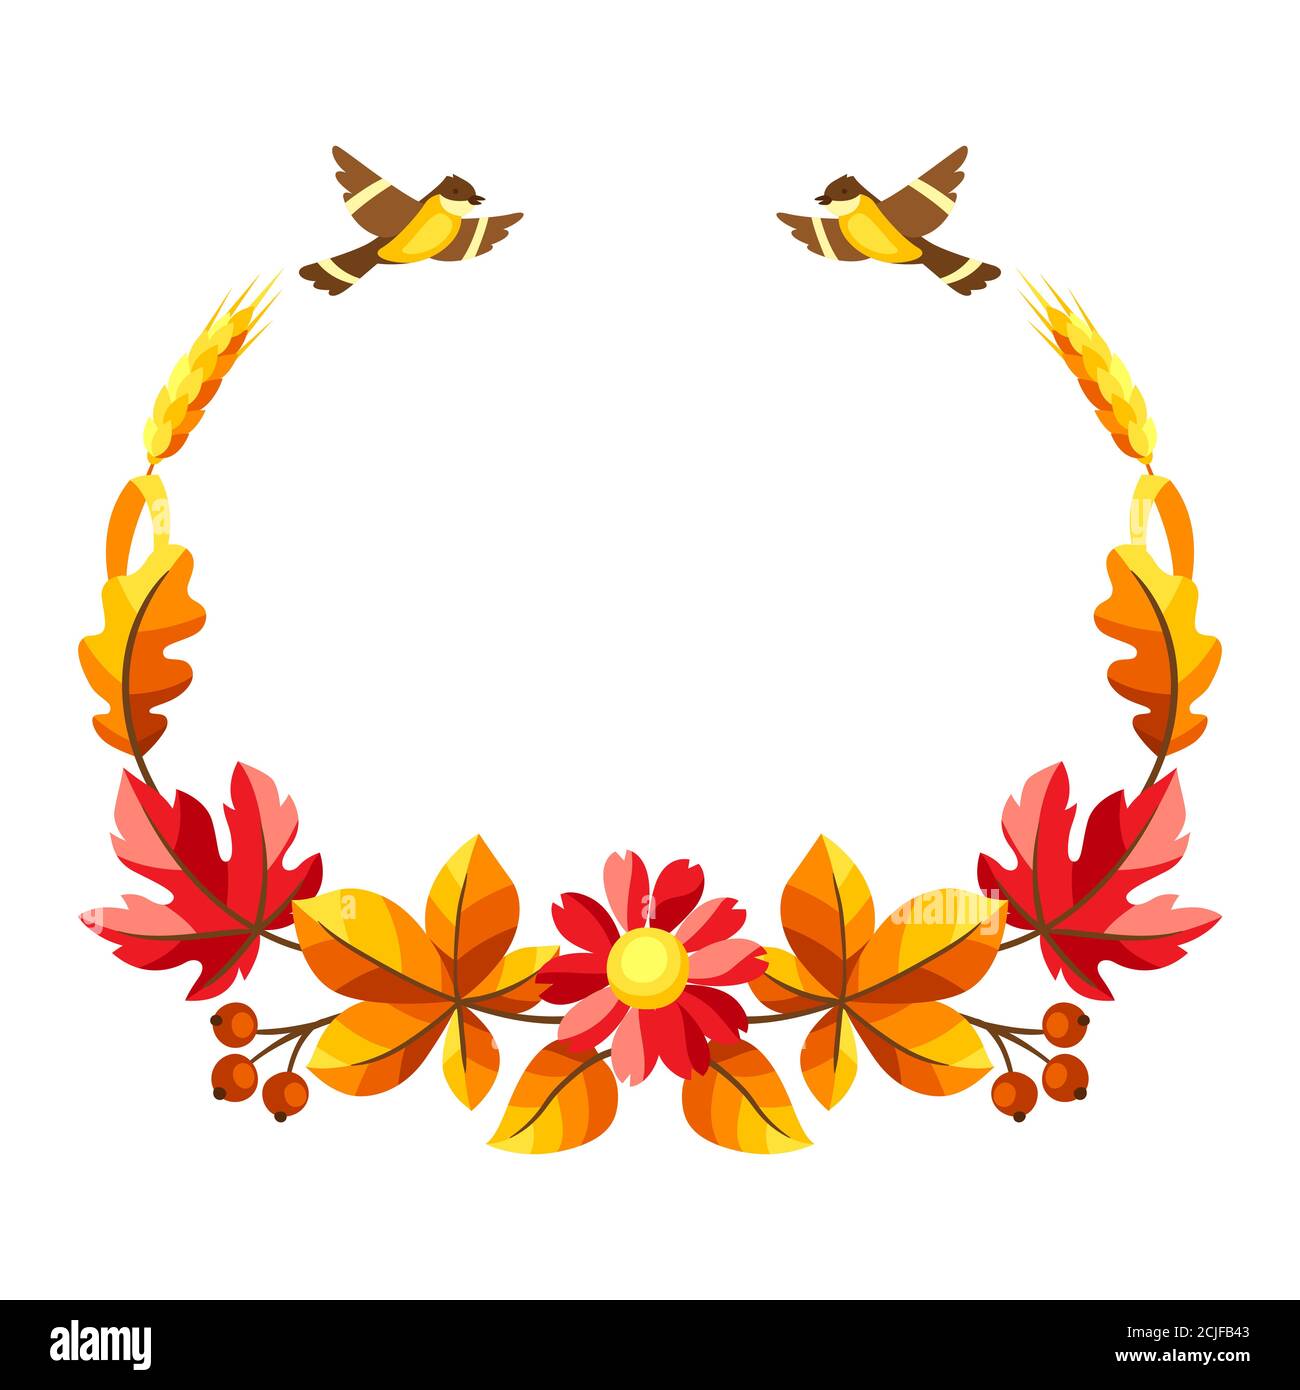 Autumn frame with seasonal leaves and items. Stock Vector